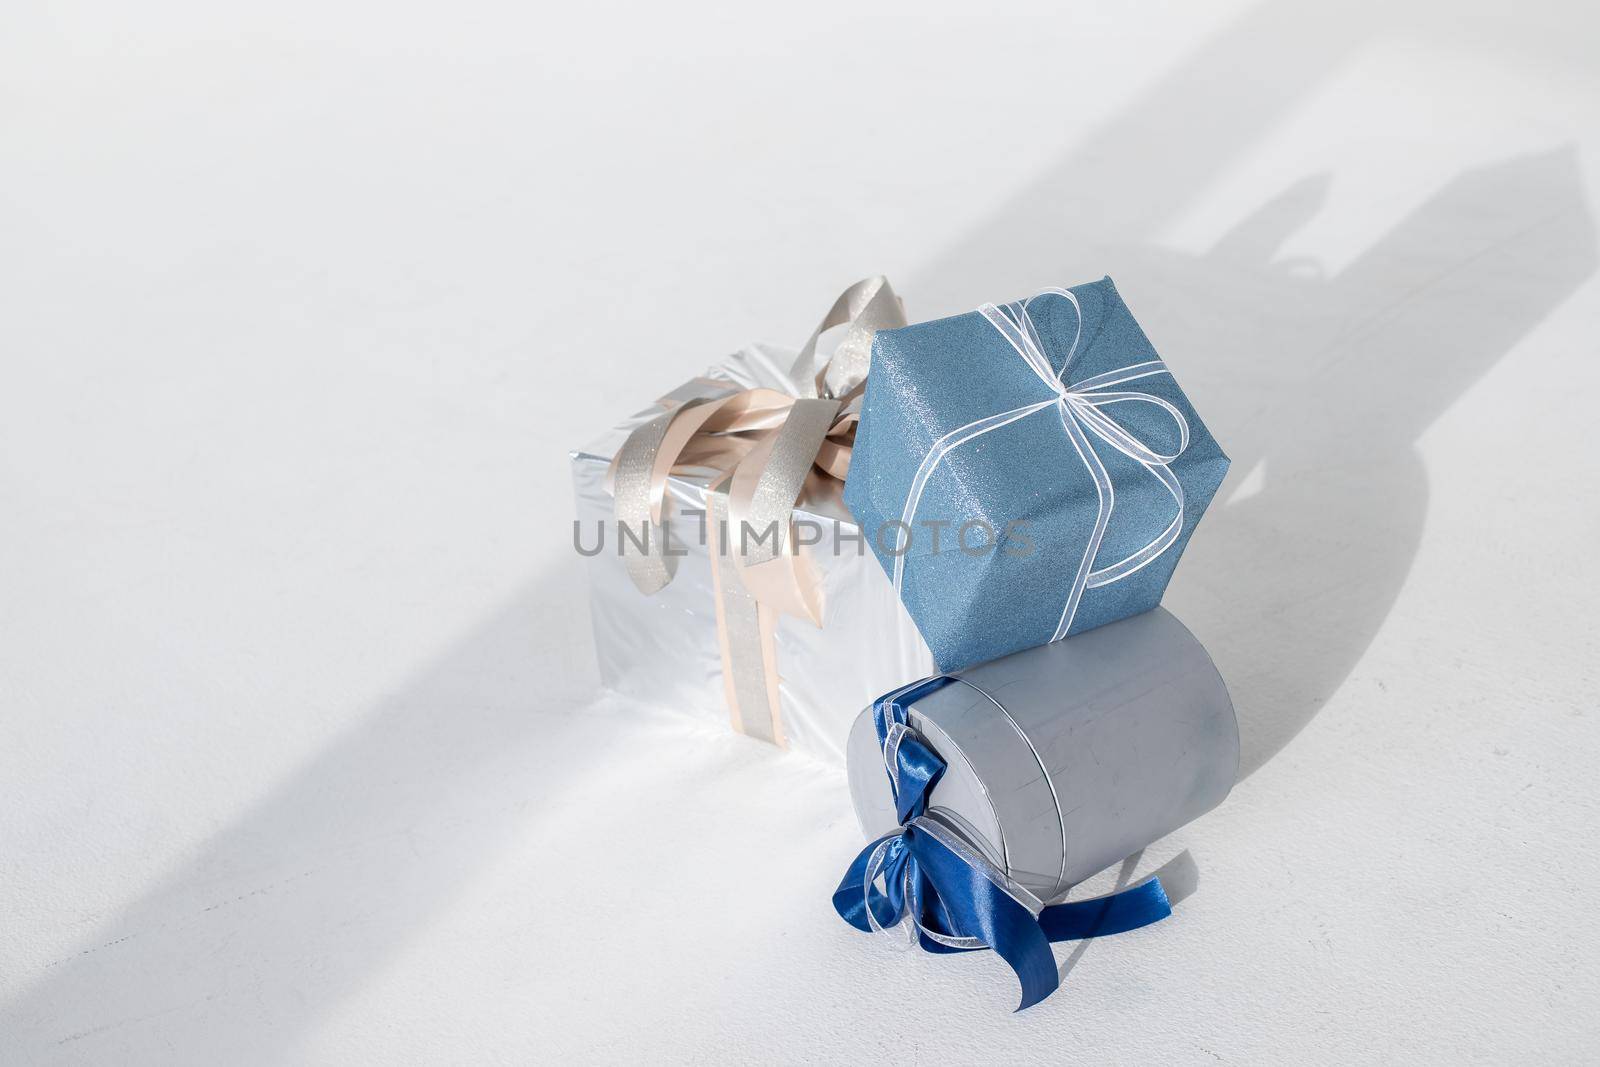 Decorative Christmas gifts on white background.blue and silver stylish christmas gifts. morning family waiting for eve. Happy new year presents. celebration concept by YuliaYaspe1979